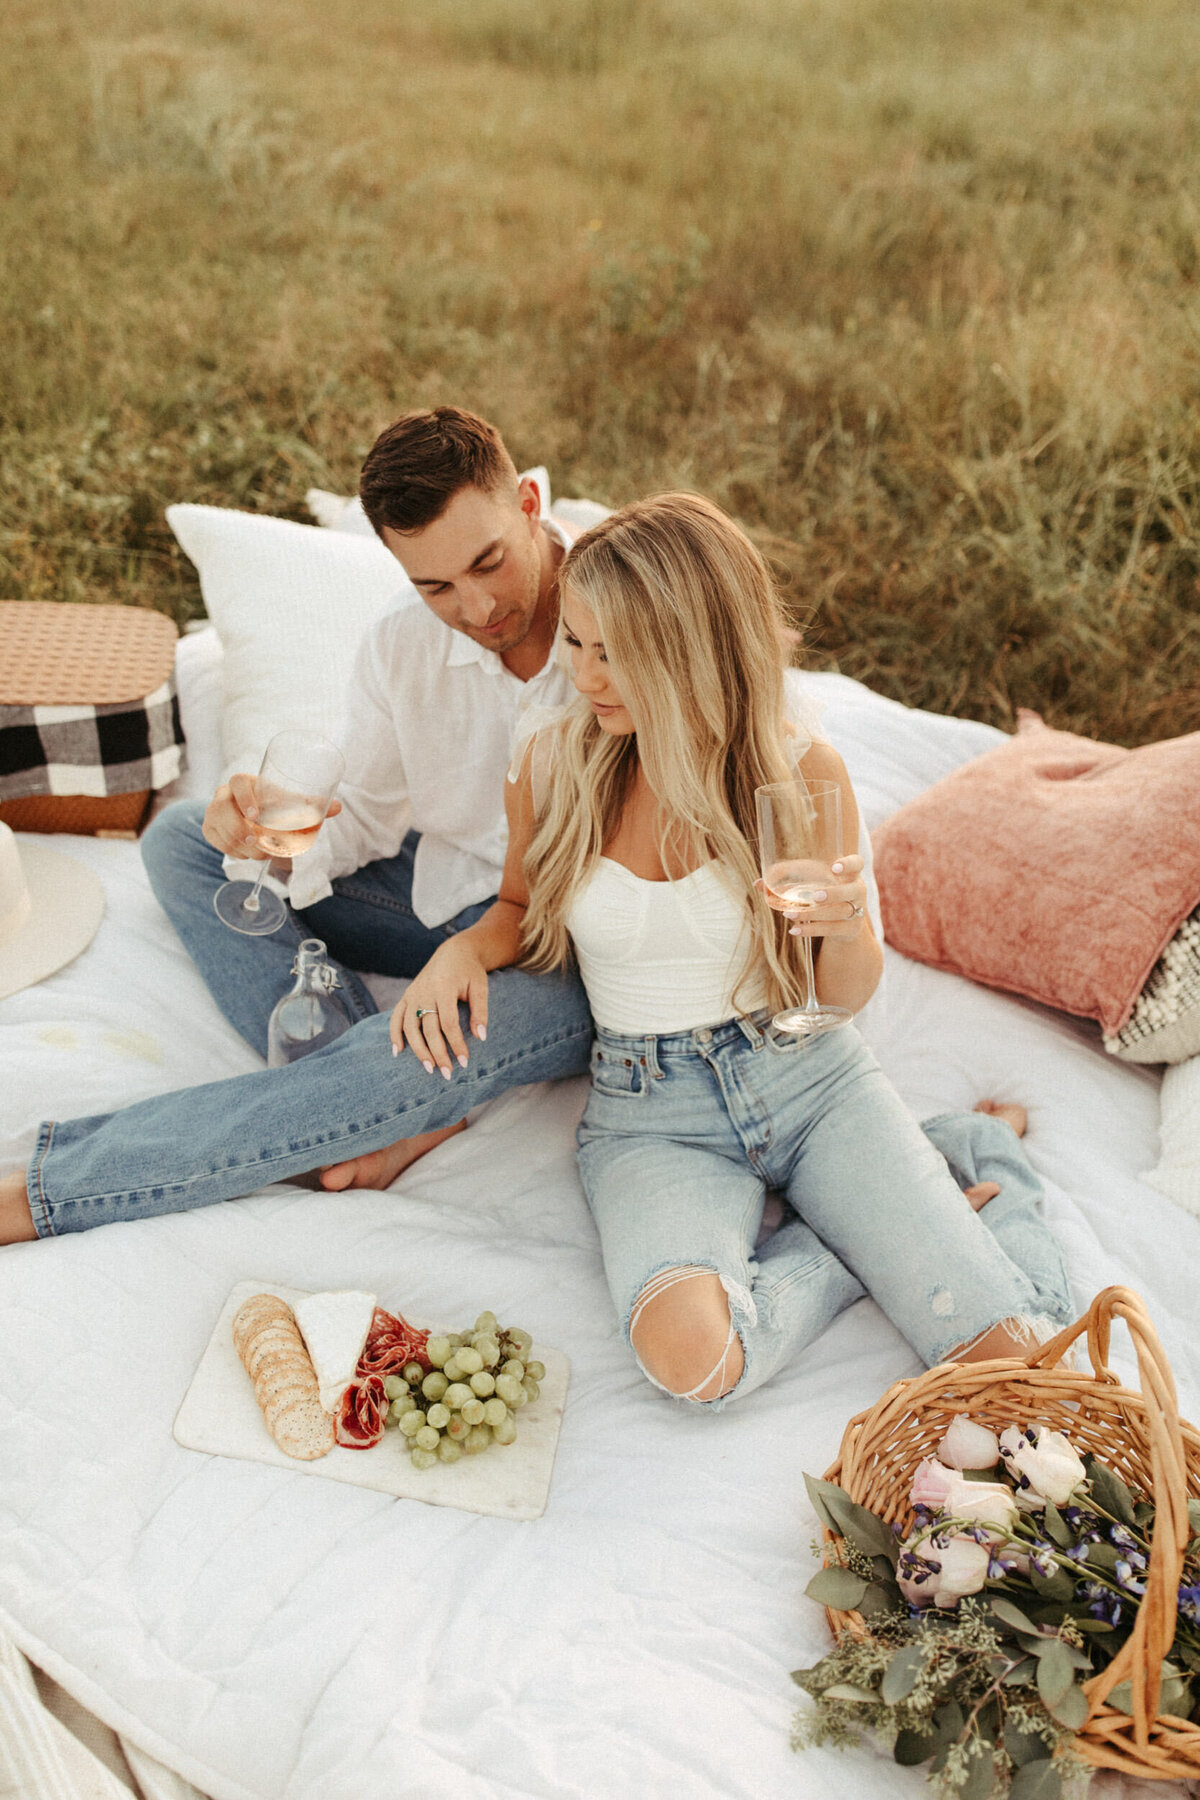 summer-garden-engagement-session-chic-rose-wine-picnic-charcuterie-board-6